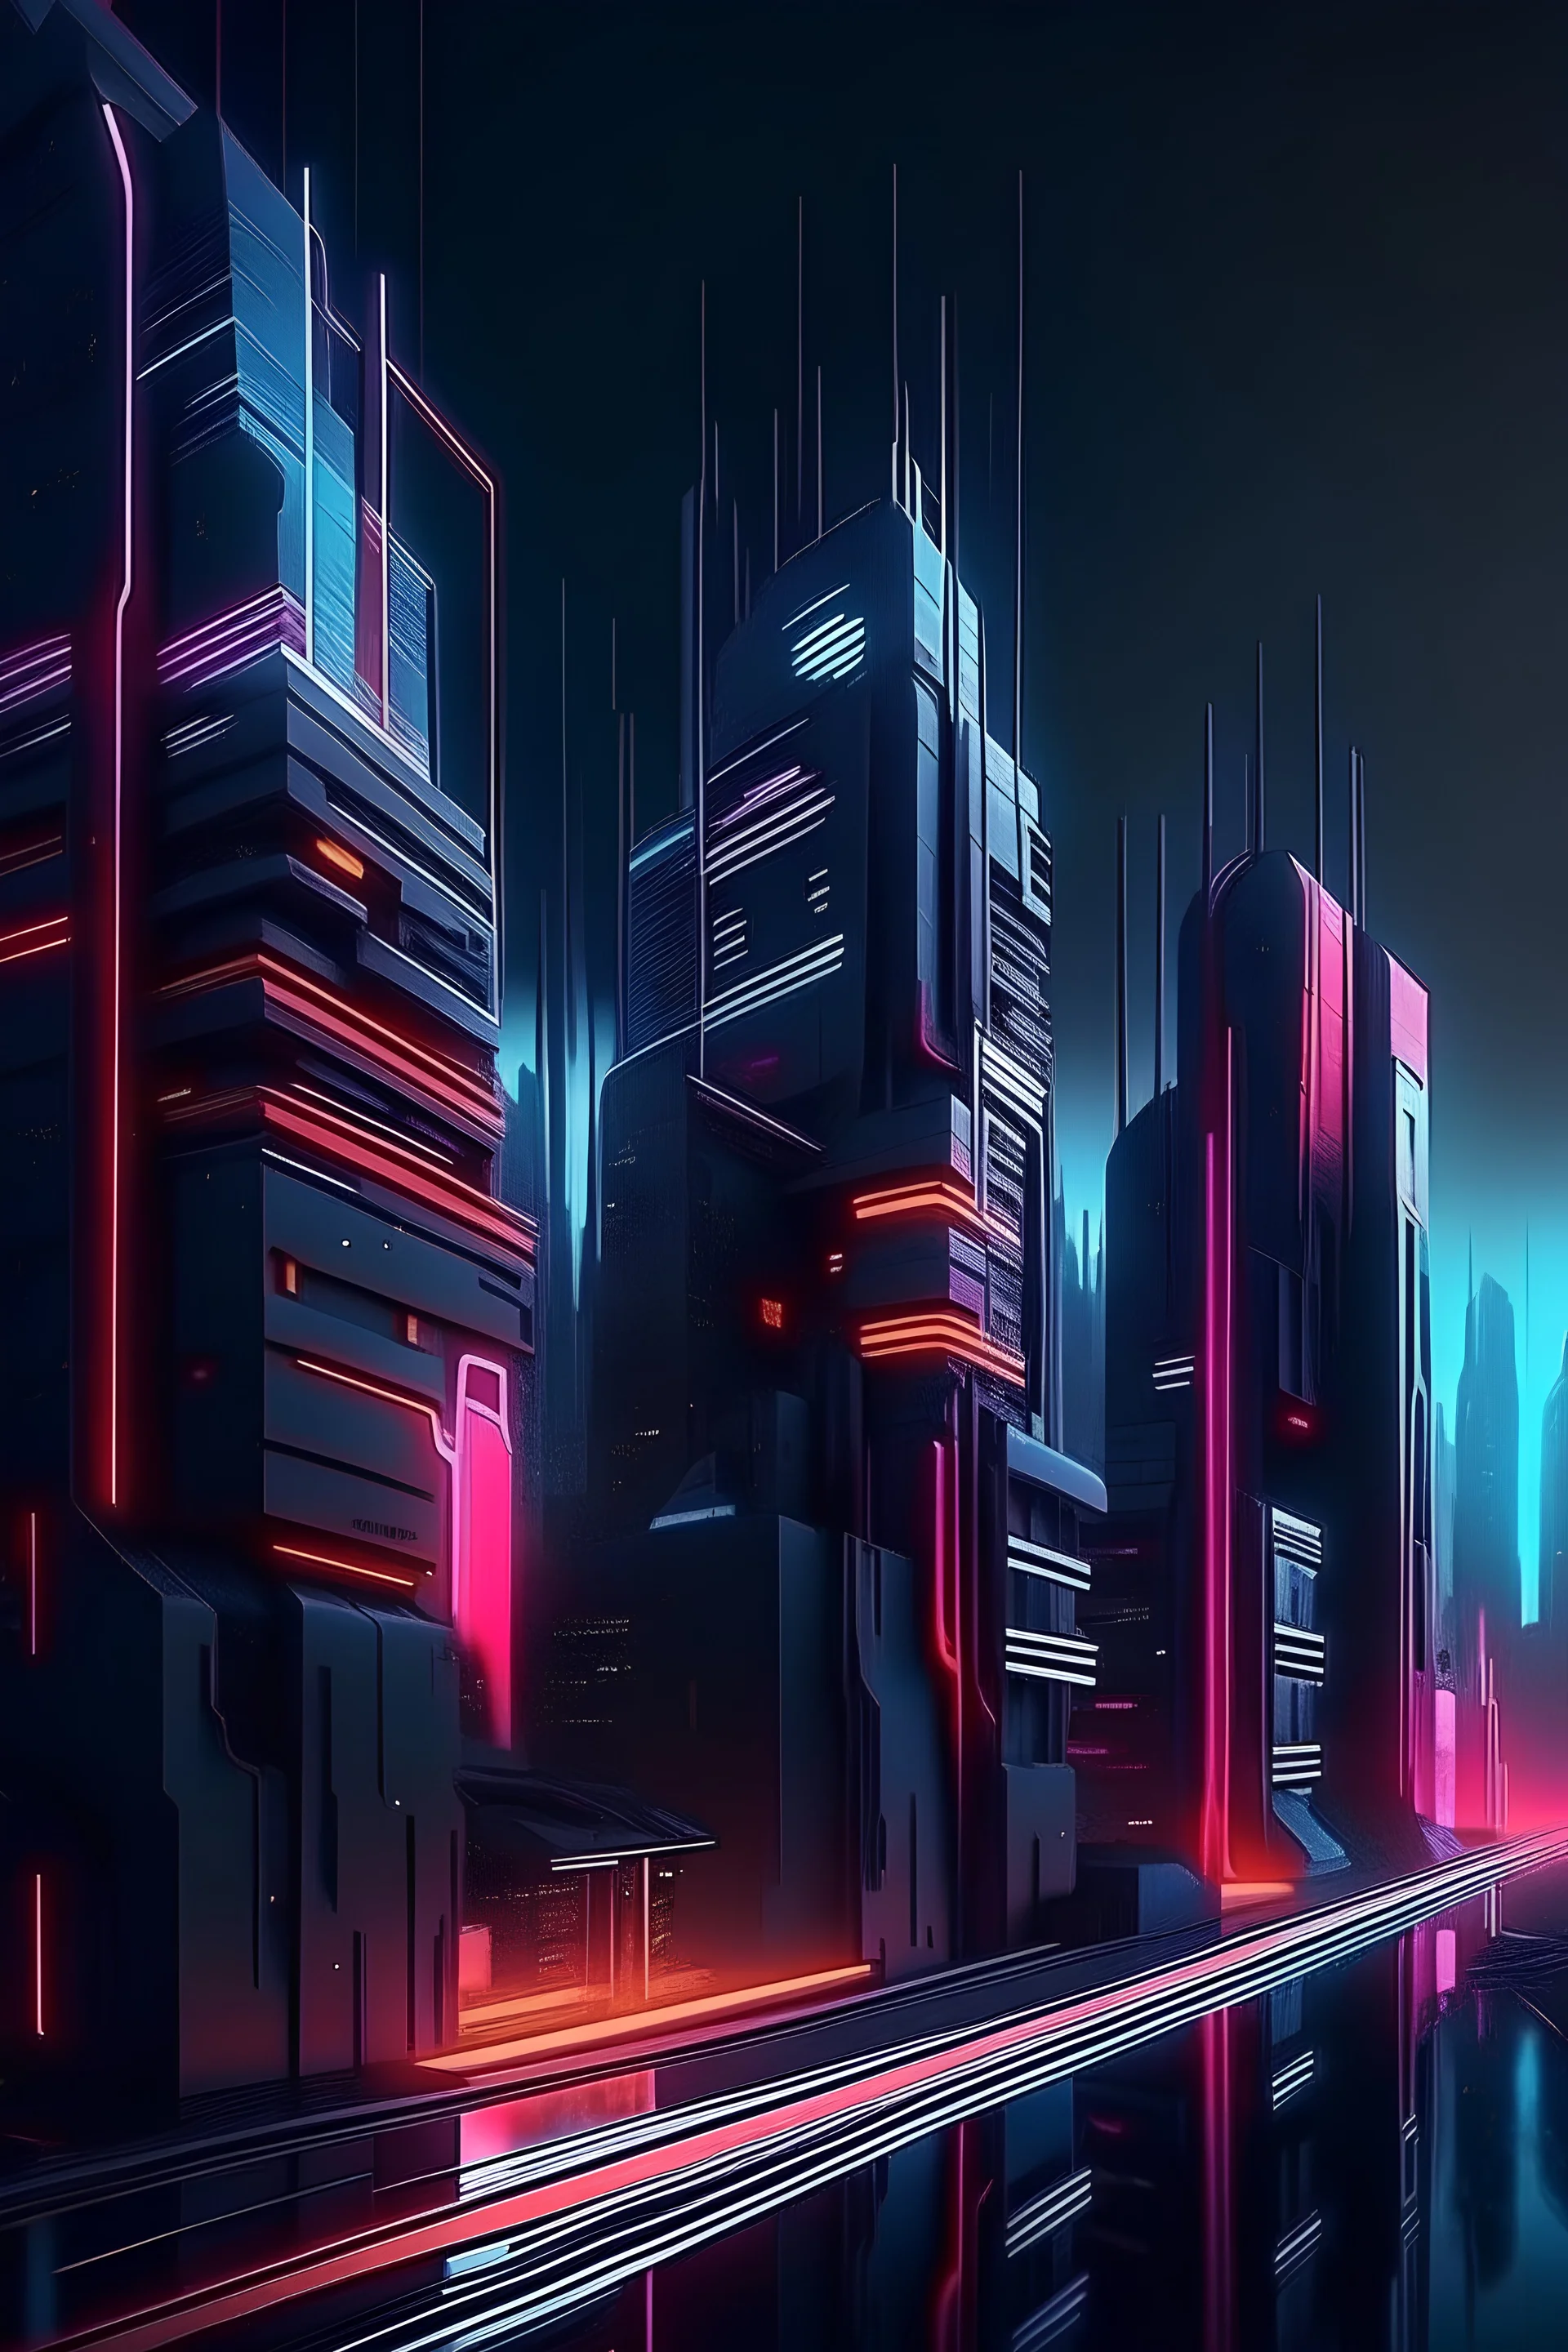 Abstract art cyberpunk cityscape featuring neon-lit skyscrapers, 3d, 8k, photo realism